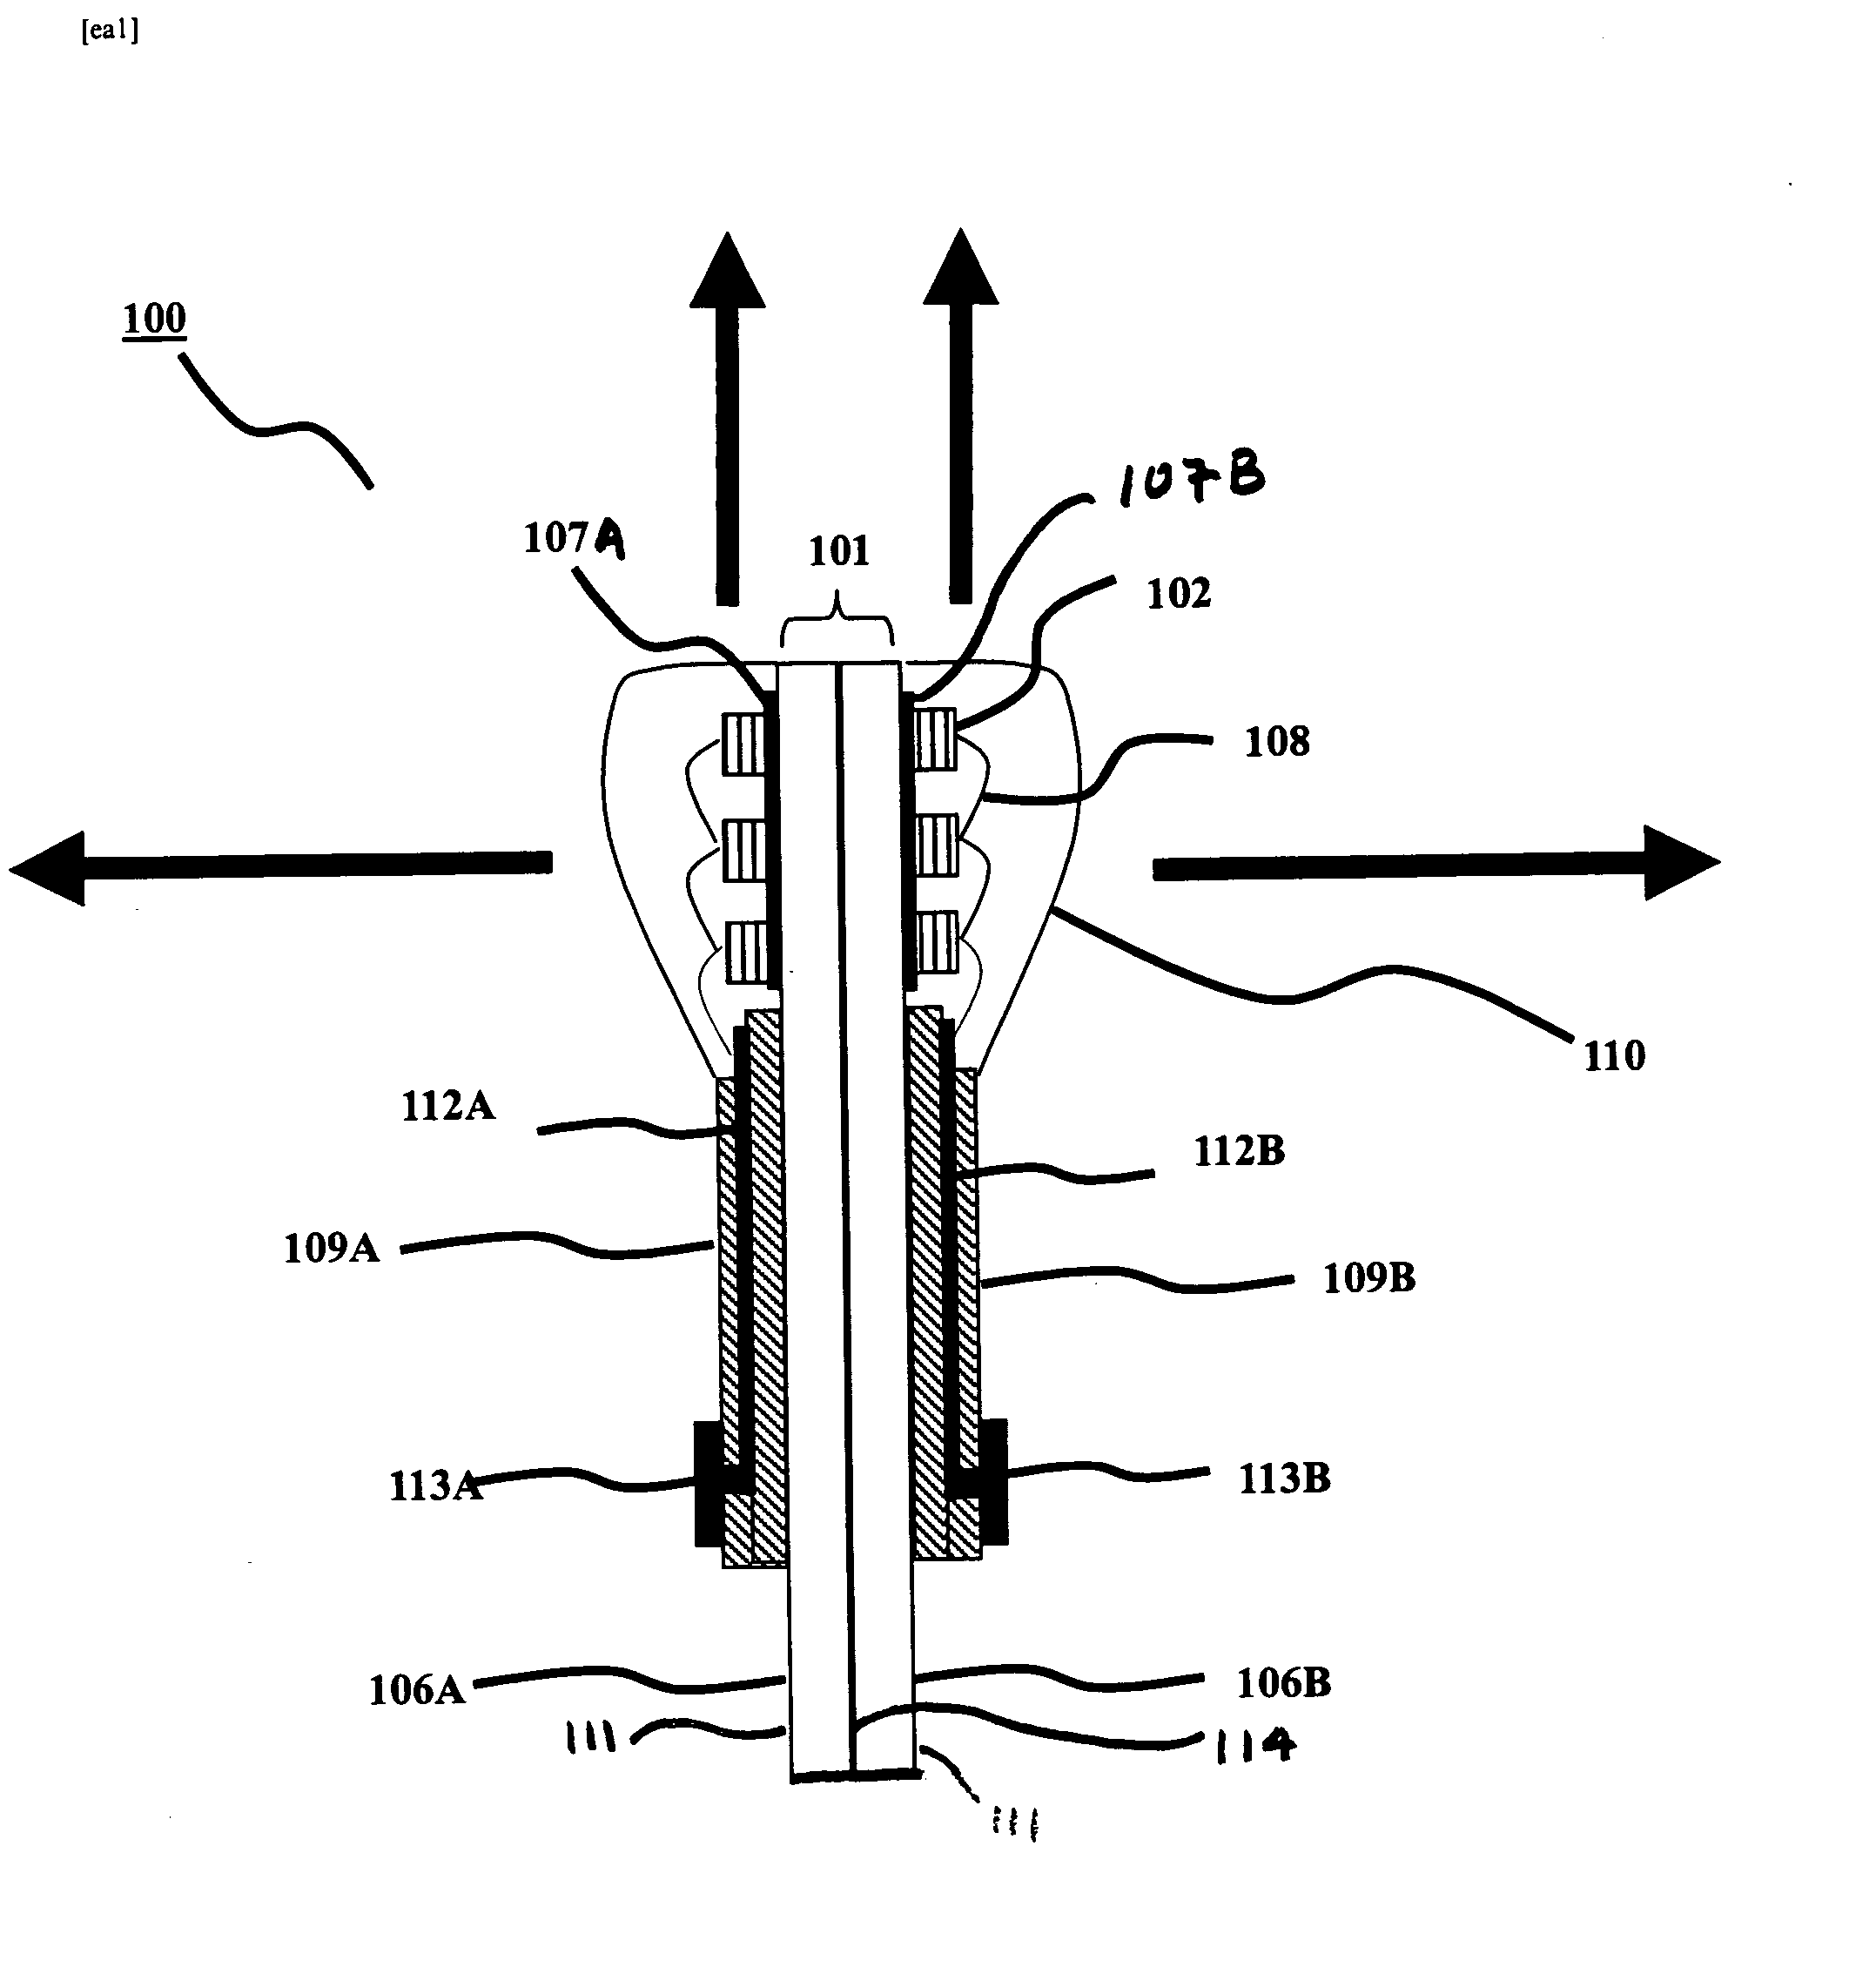 Light emitting diode package assembly that emulates the light pattern produced by an incandescent filament bulb